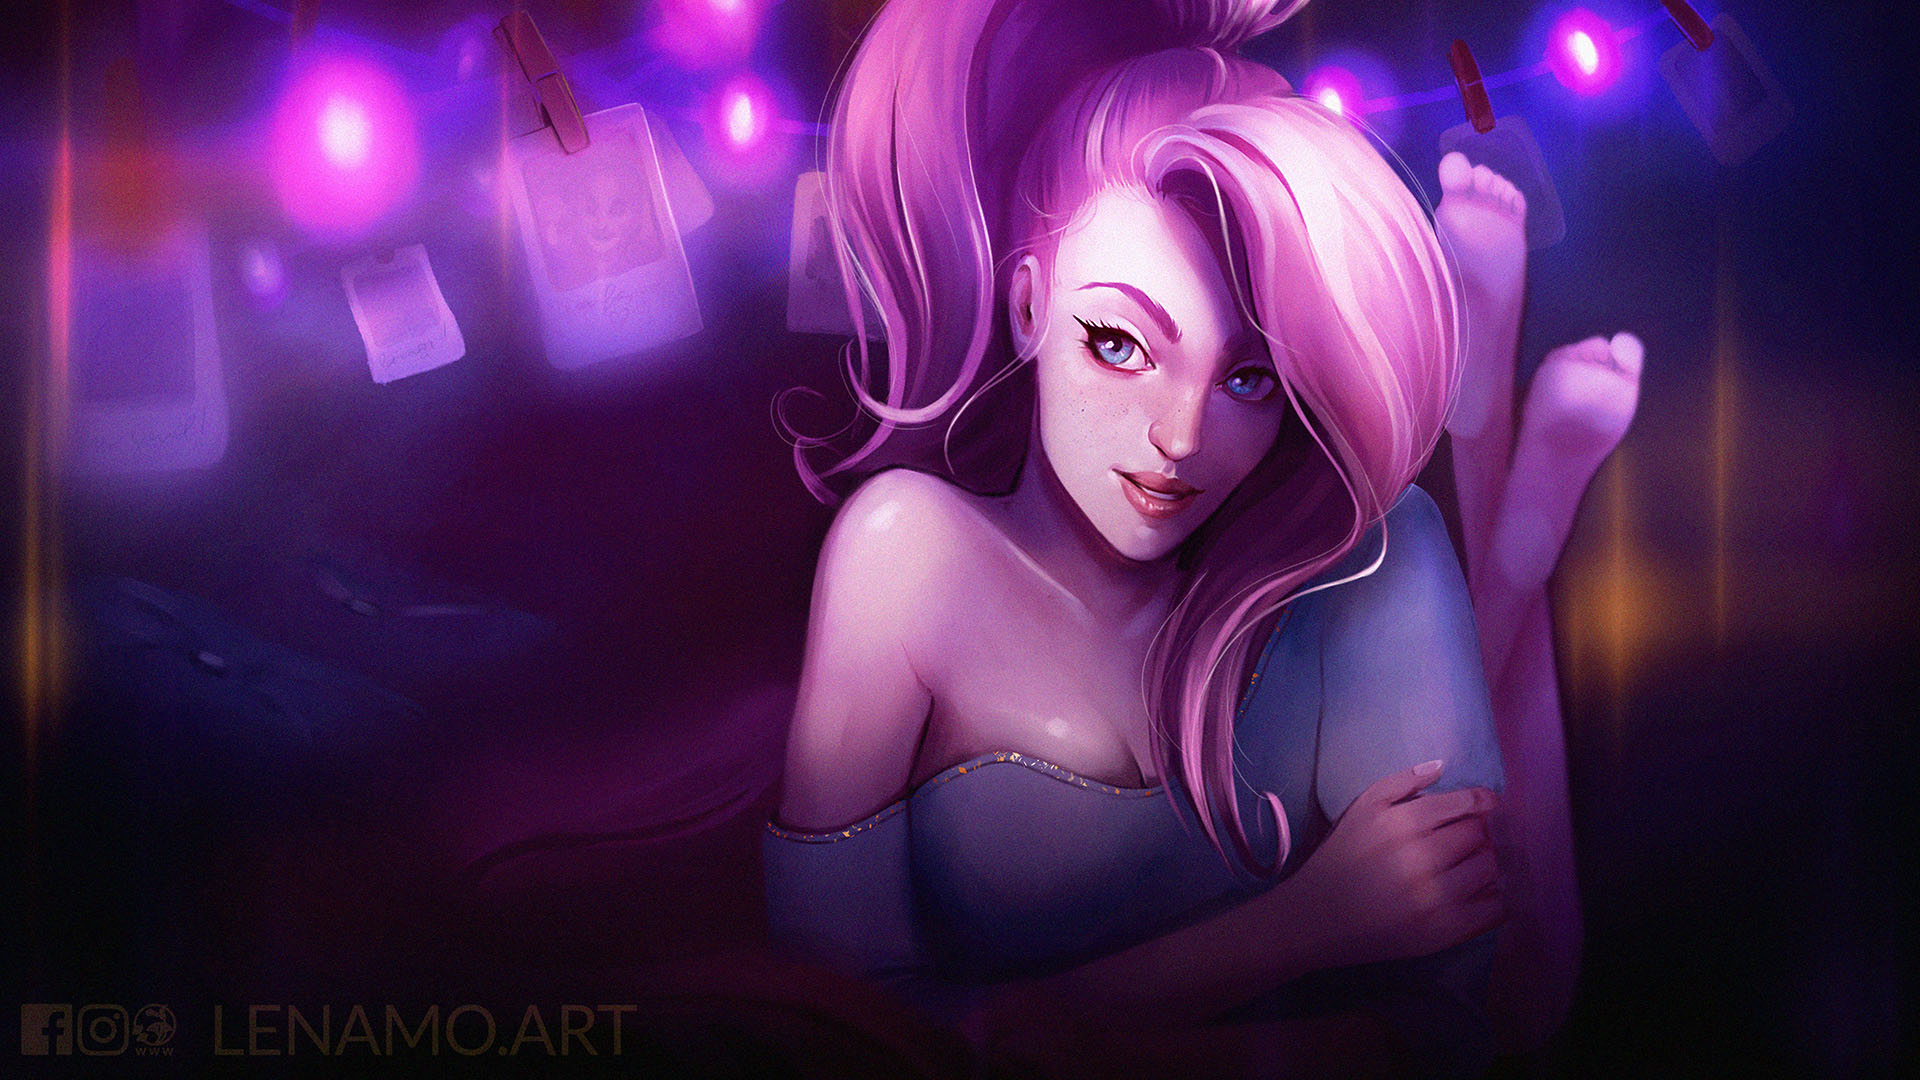 Cute Seraphine wallpaper, League of Legends, download for free